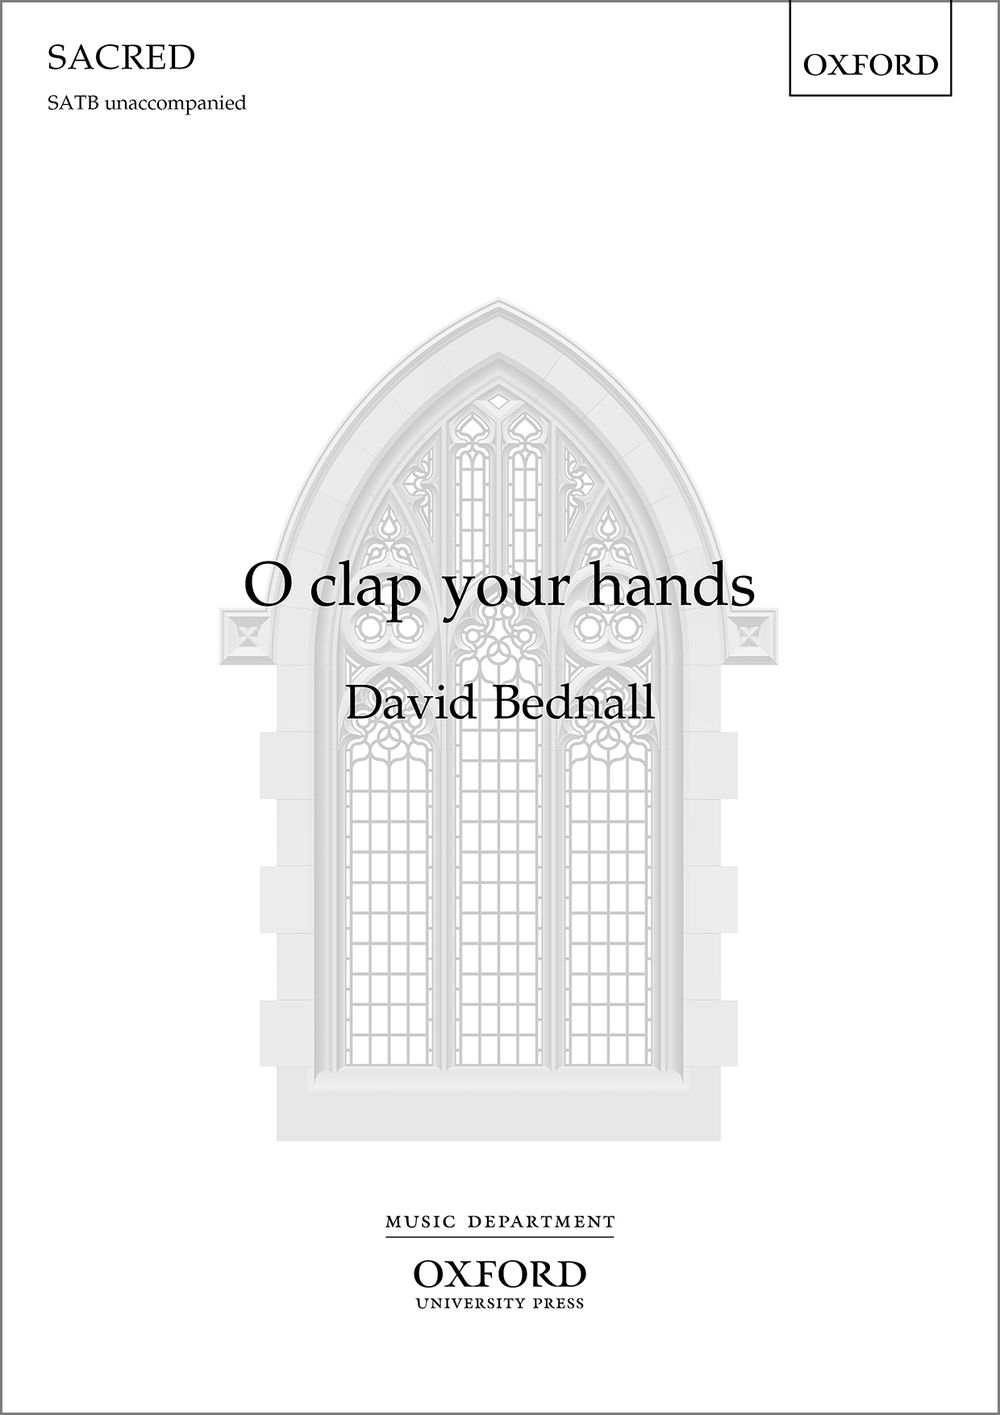 David Bednall: O clap your hands: SATB: Vocal Score